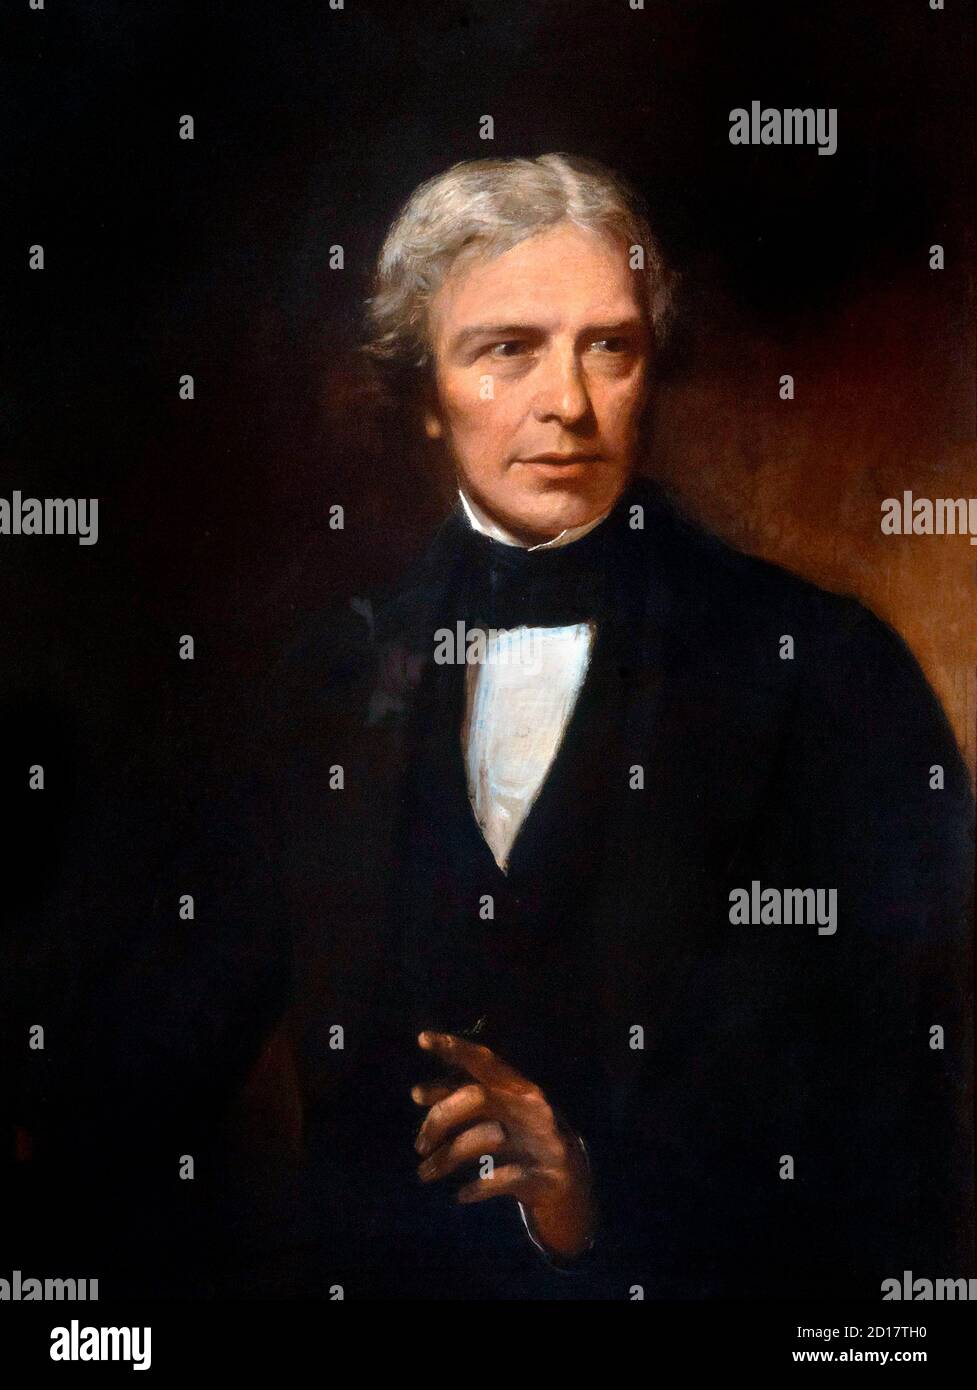 Michael Faraday (1791-1867), portrait by Alexander Blaikley (1816-1903), oil on canvas, 1840s. Faraday was an English scientist who contributed to the study of electromagnetism and electrochemistry. Stock Photo